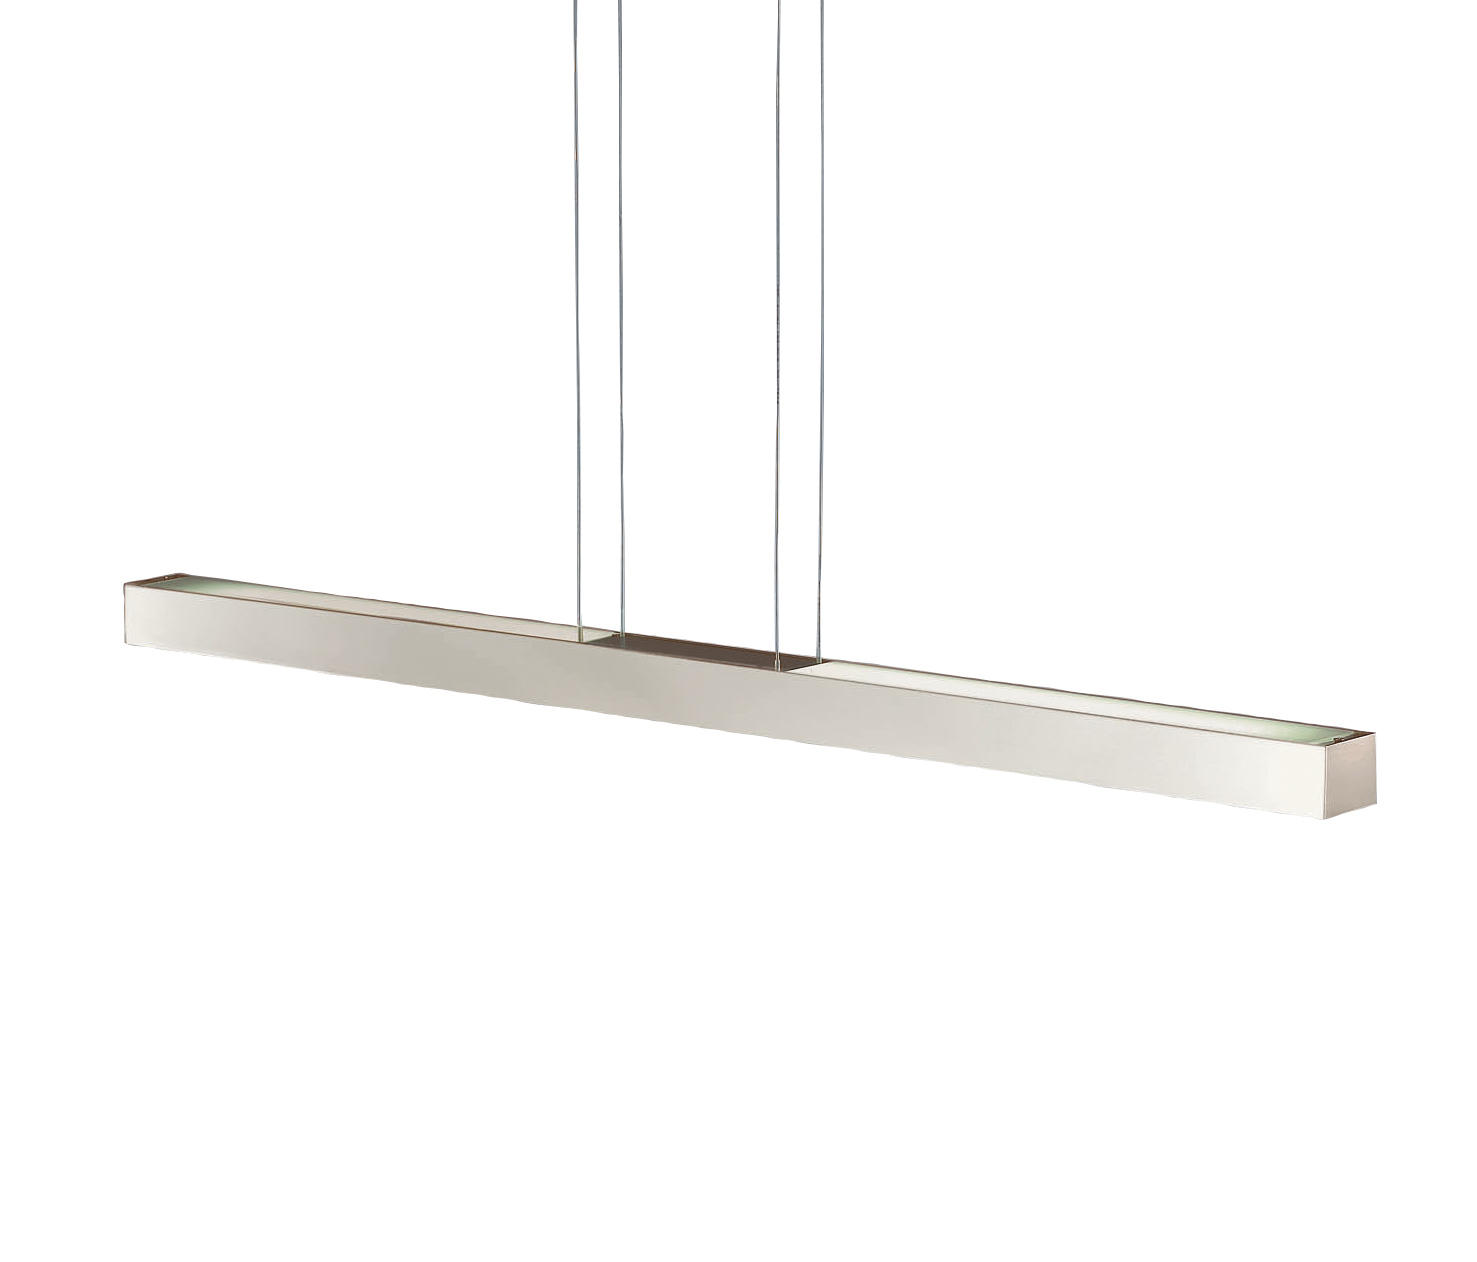 Box Hl 120 Suspended Lights From Decor Walther Architonic